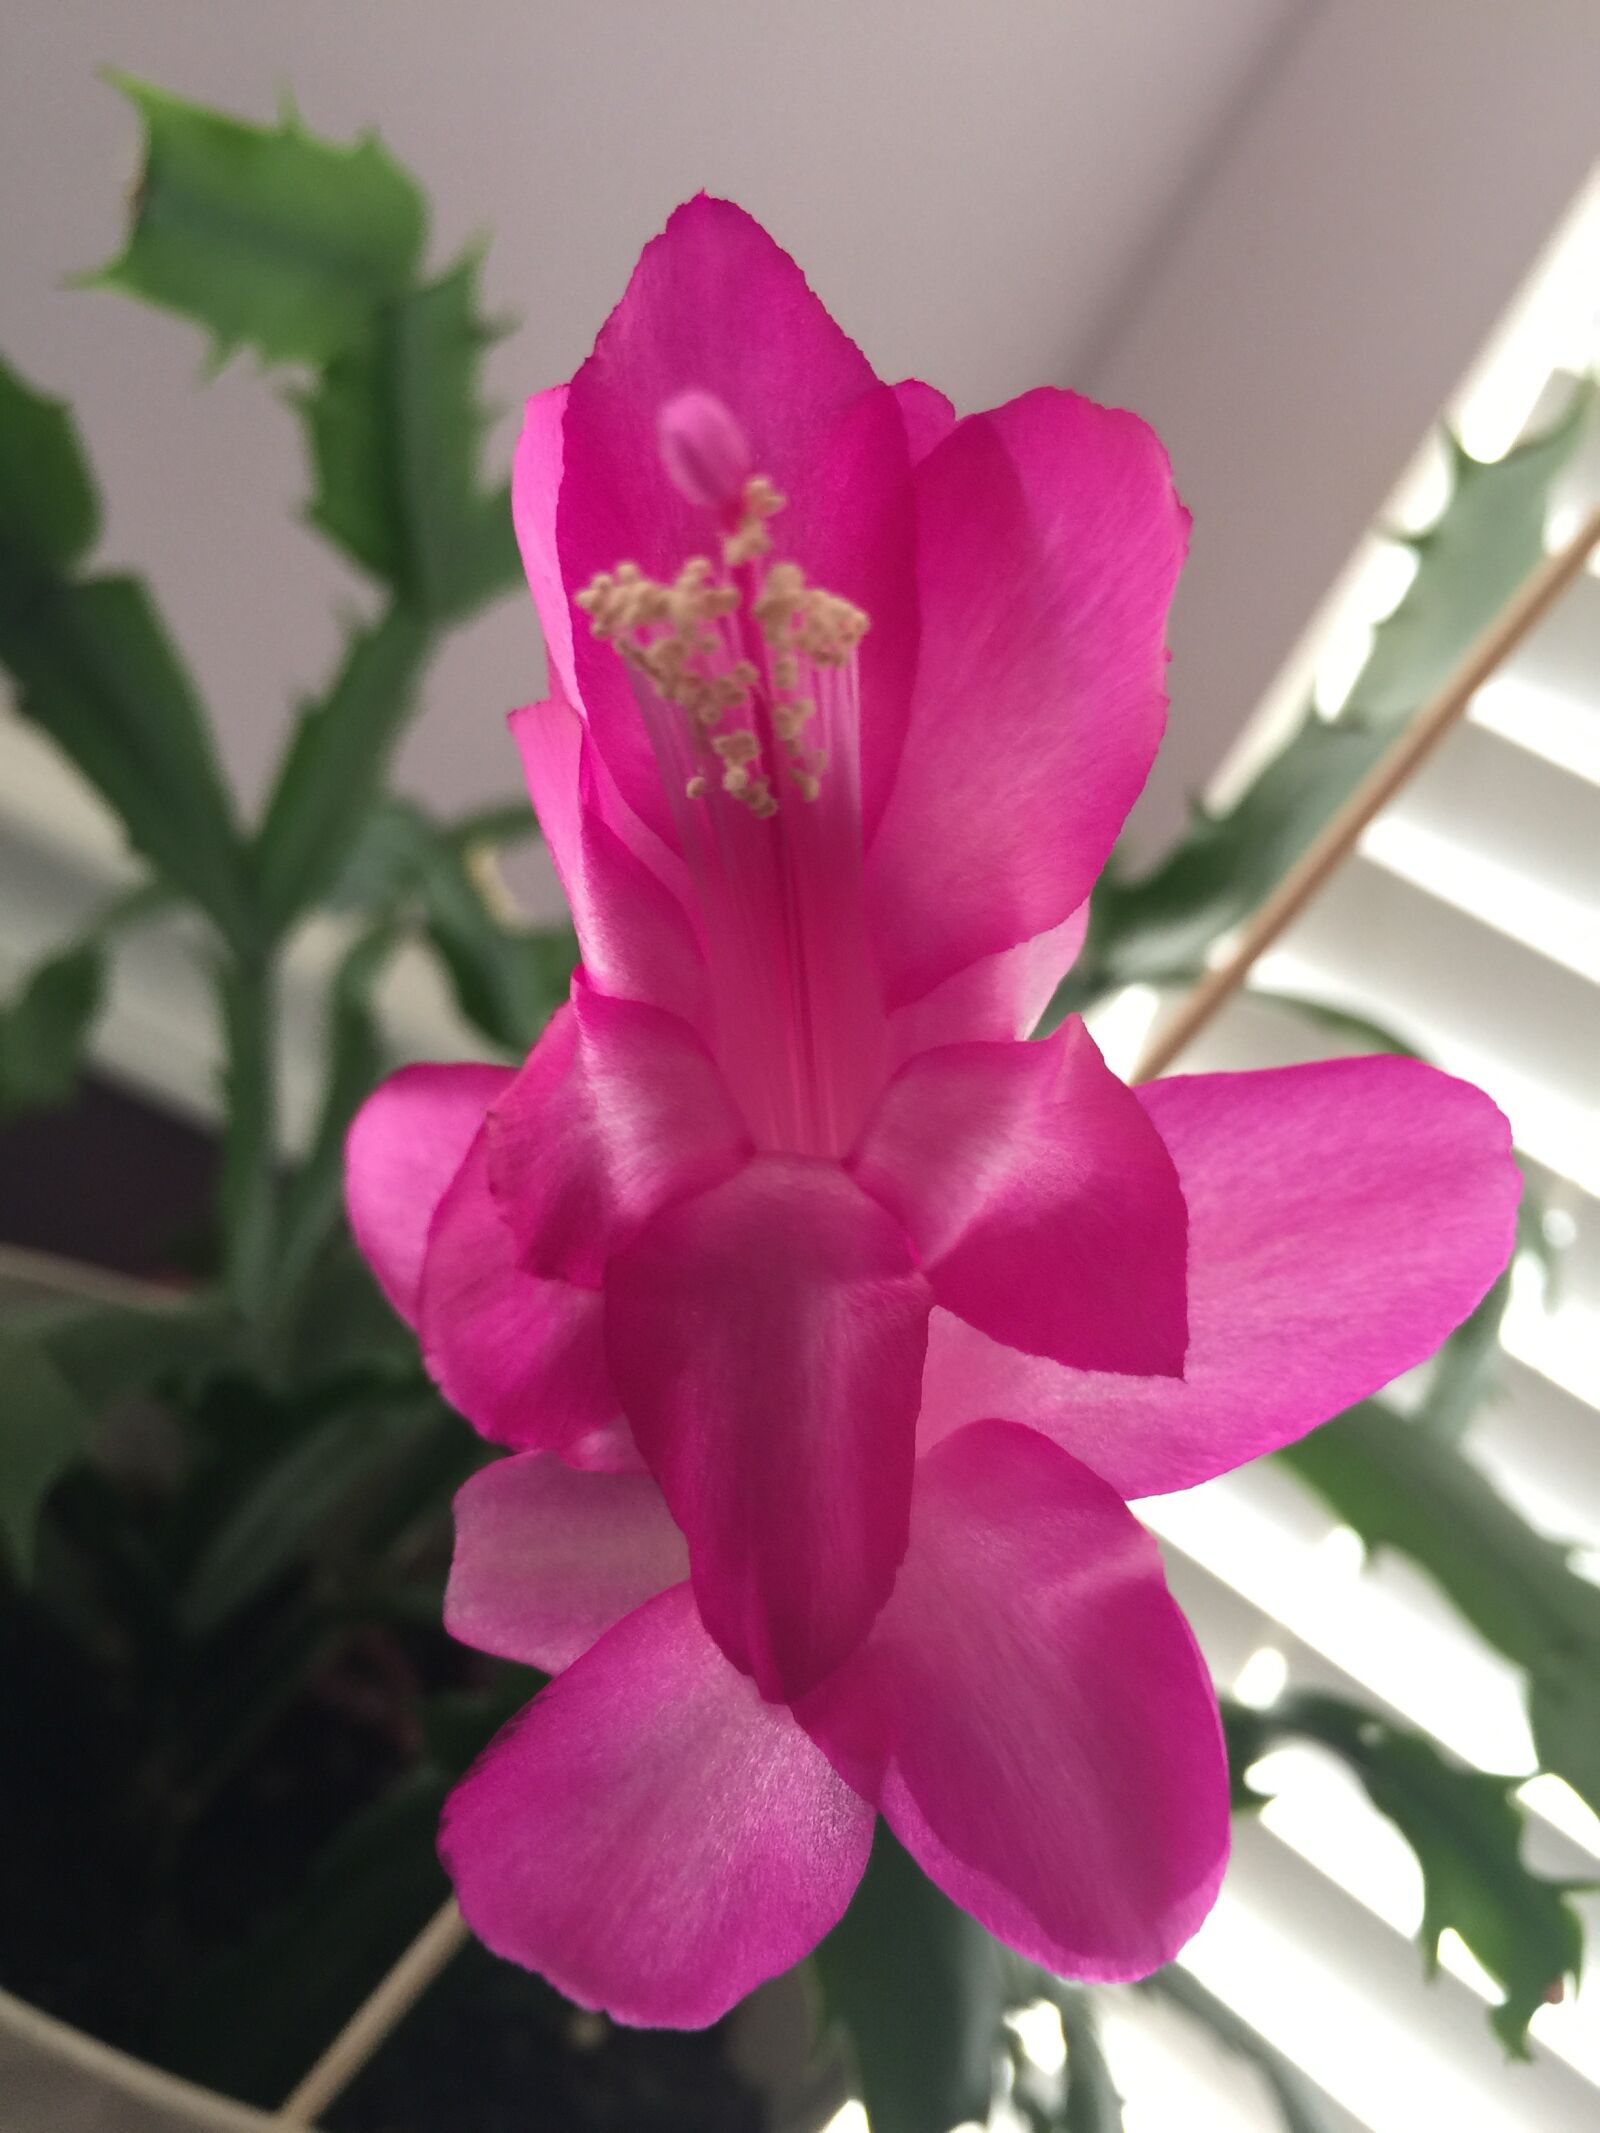 Apple iPhone 6 Plus + iPhone 6 Plus back camera 4.15mm f/2.2 sample photo. Christmas plant, pink, bloom photography